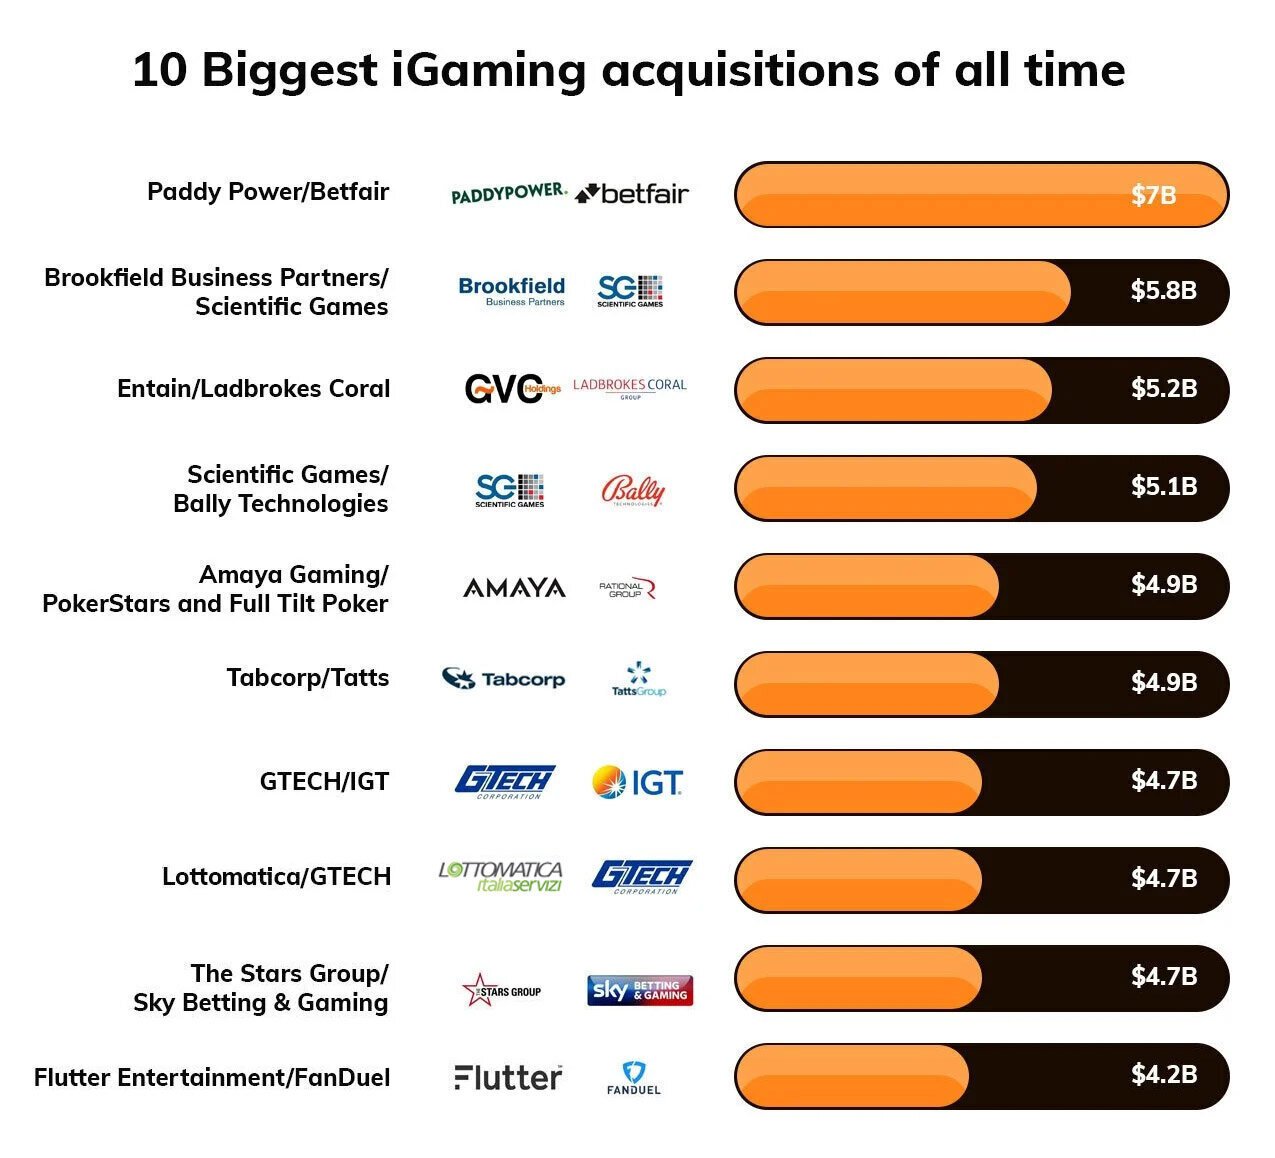 The biggest casino acquisitions of all time